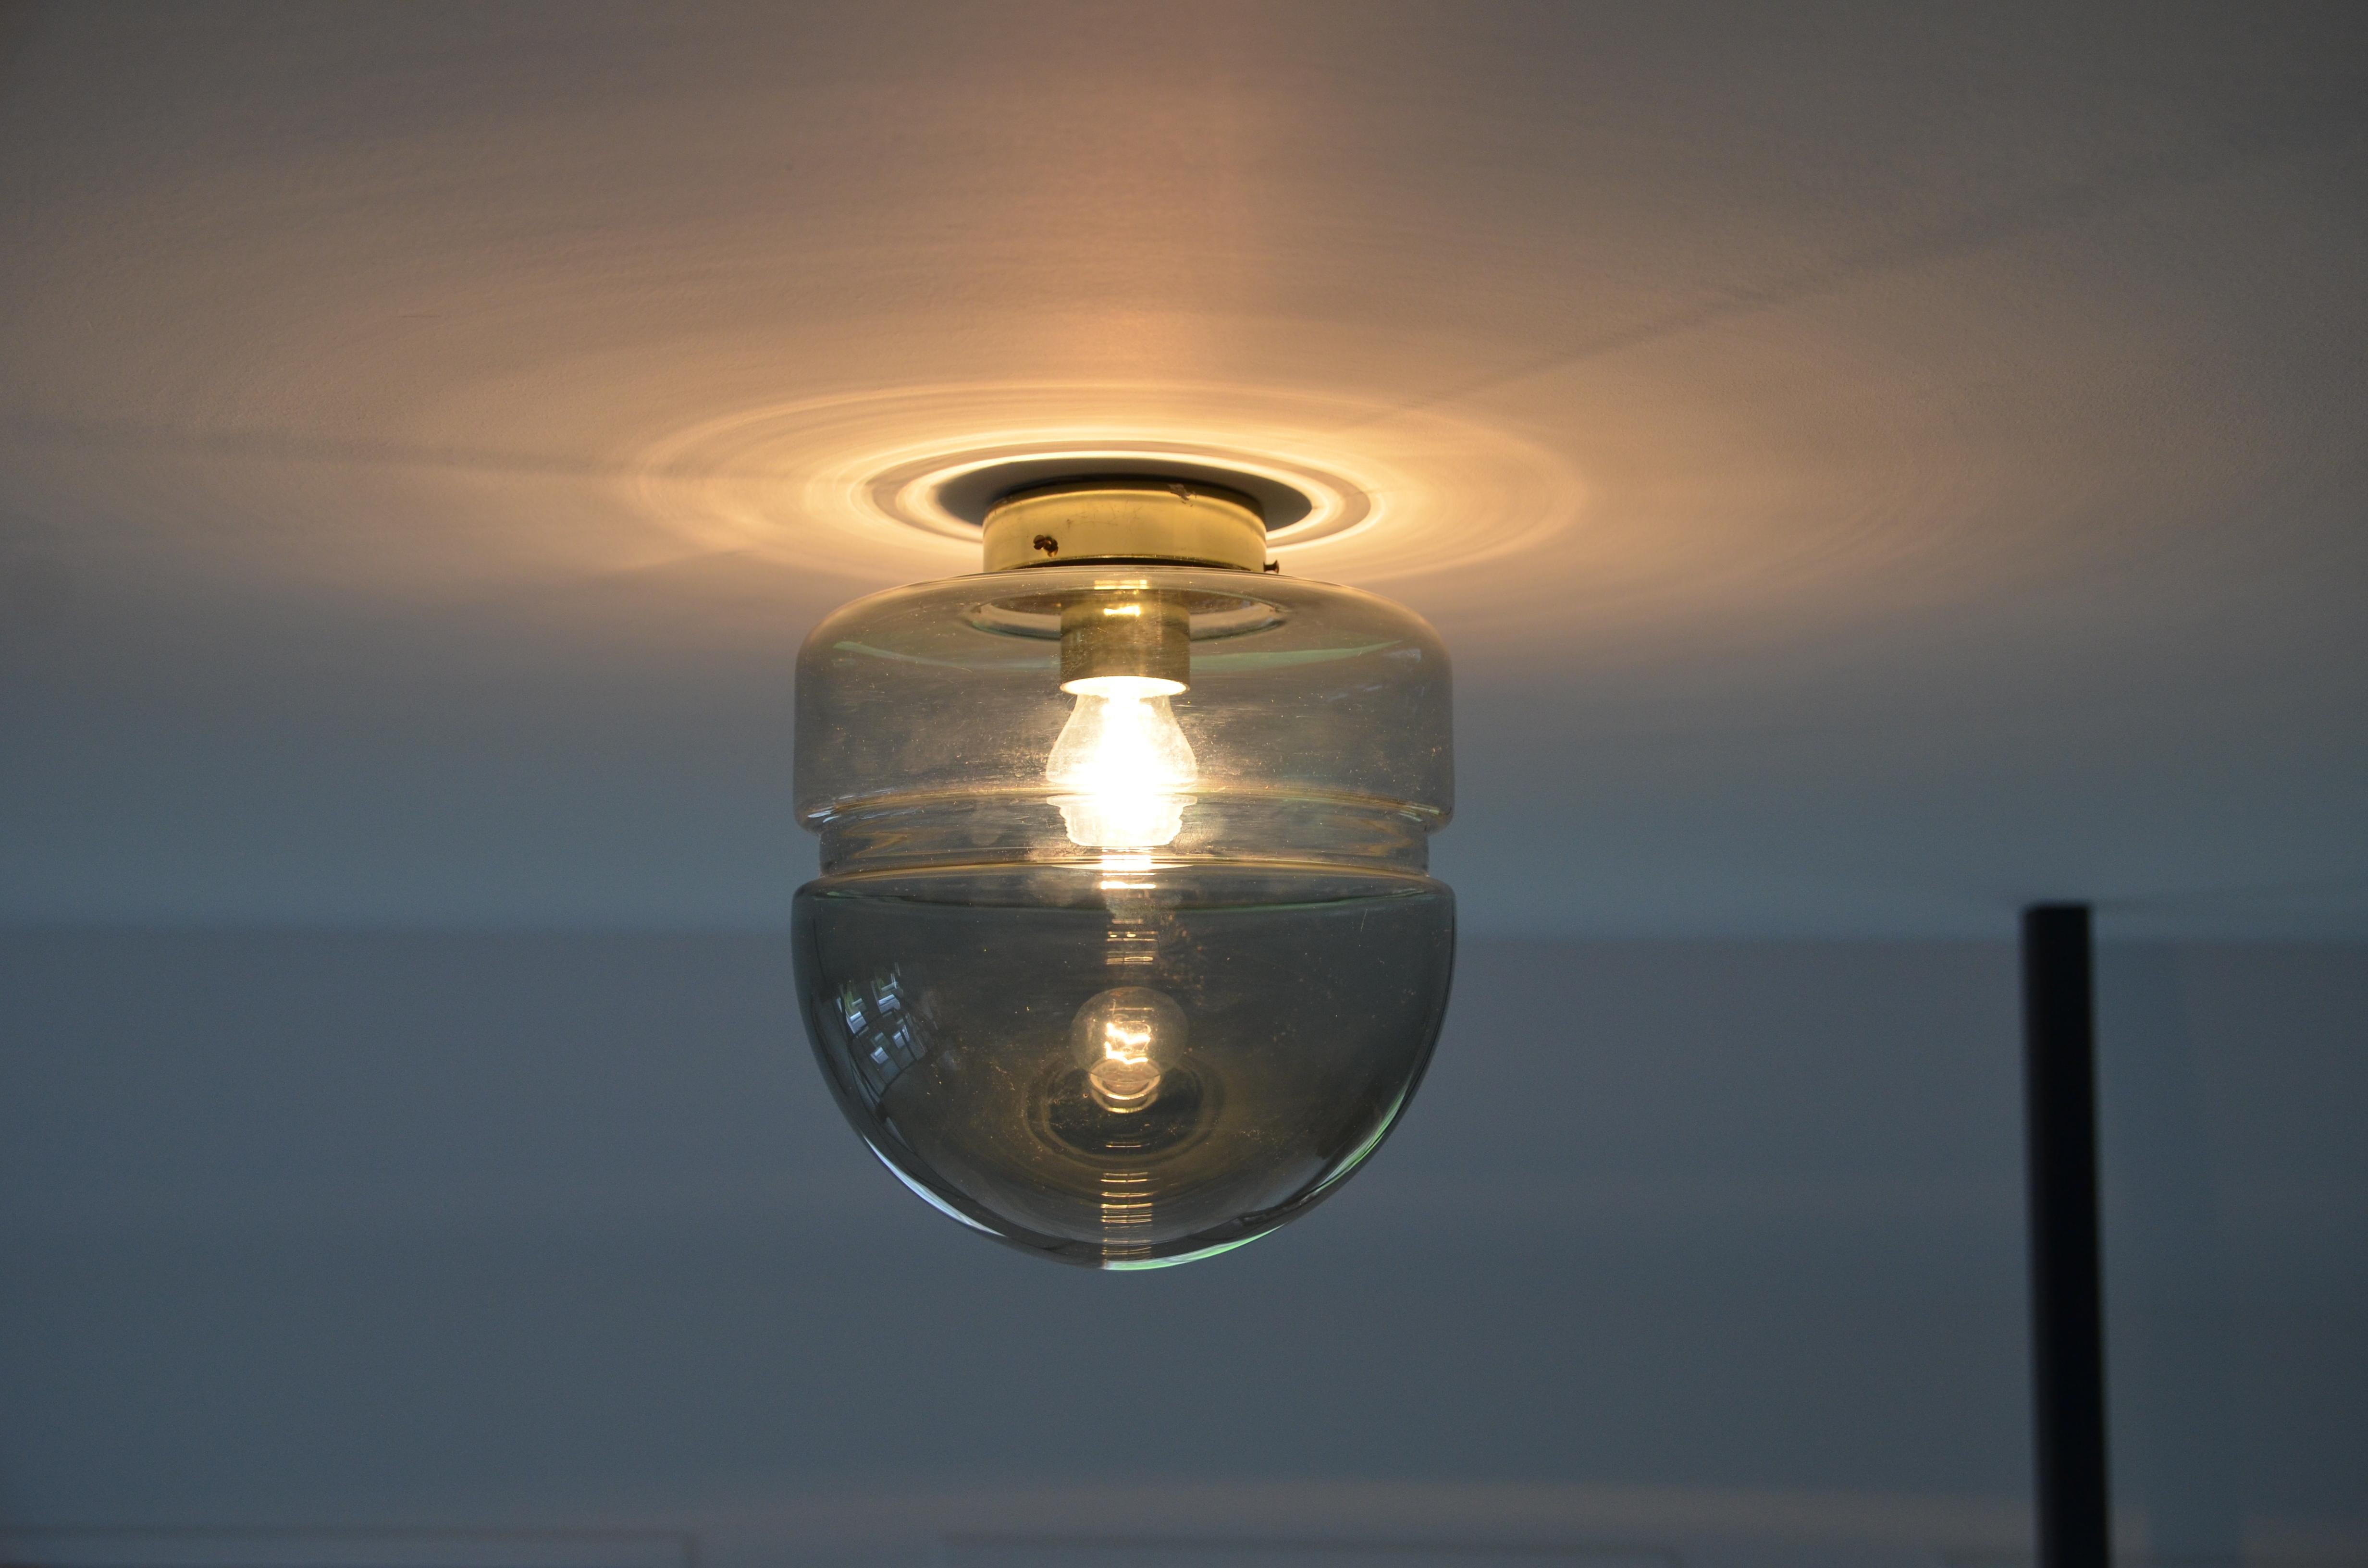 Simple, round ceiling light in grey smoked glass. The glass bulb is attached to a brass colored fixture. Can also be used as wall light.